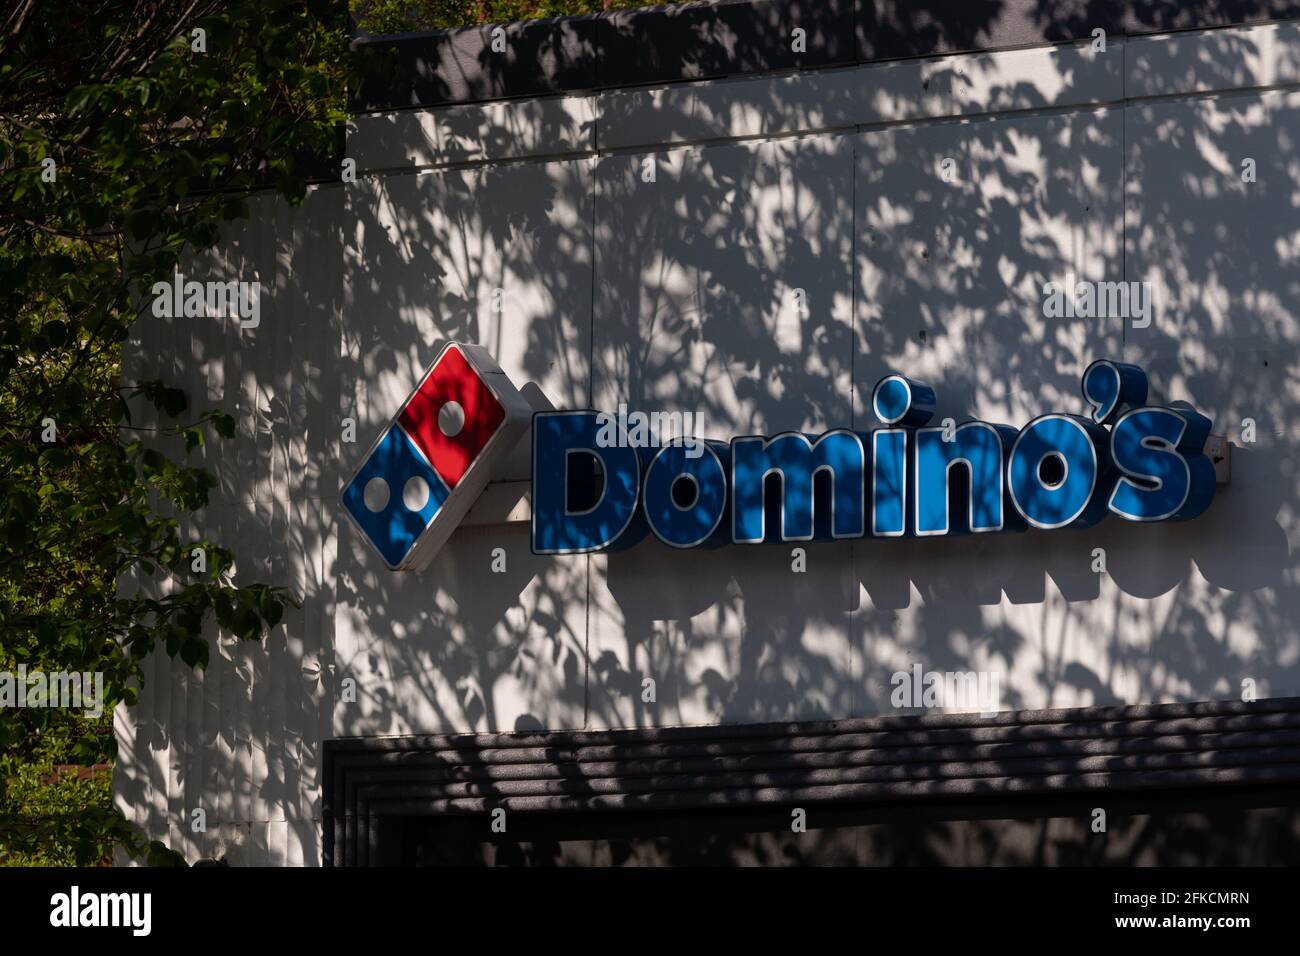 Washington, USA. 30th Apr, 2021. A general view of a Domino's pizza logo at a restaurant location in Washington, DC, on Friday, April 30, 2021, amid the coronavirus pandemic. Earlier this week President Biden gave his first address to Congress, as COVID-19 cases exponentially surge to unseen levels in India and confirmed case counts in America hover above 50,000 daily. (Graeme Sloan/Sipa USA) Credit: Sipa USA/Alamy Live News Stock Photo